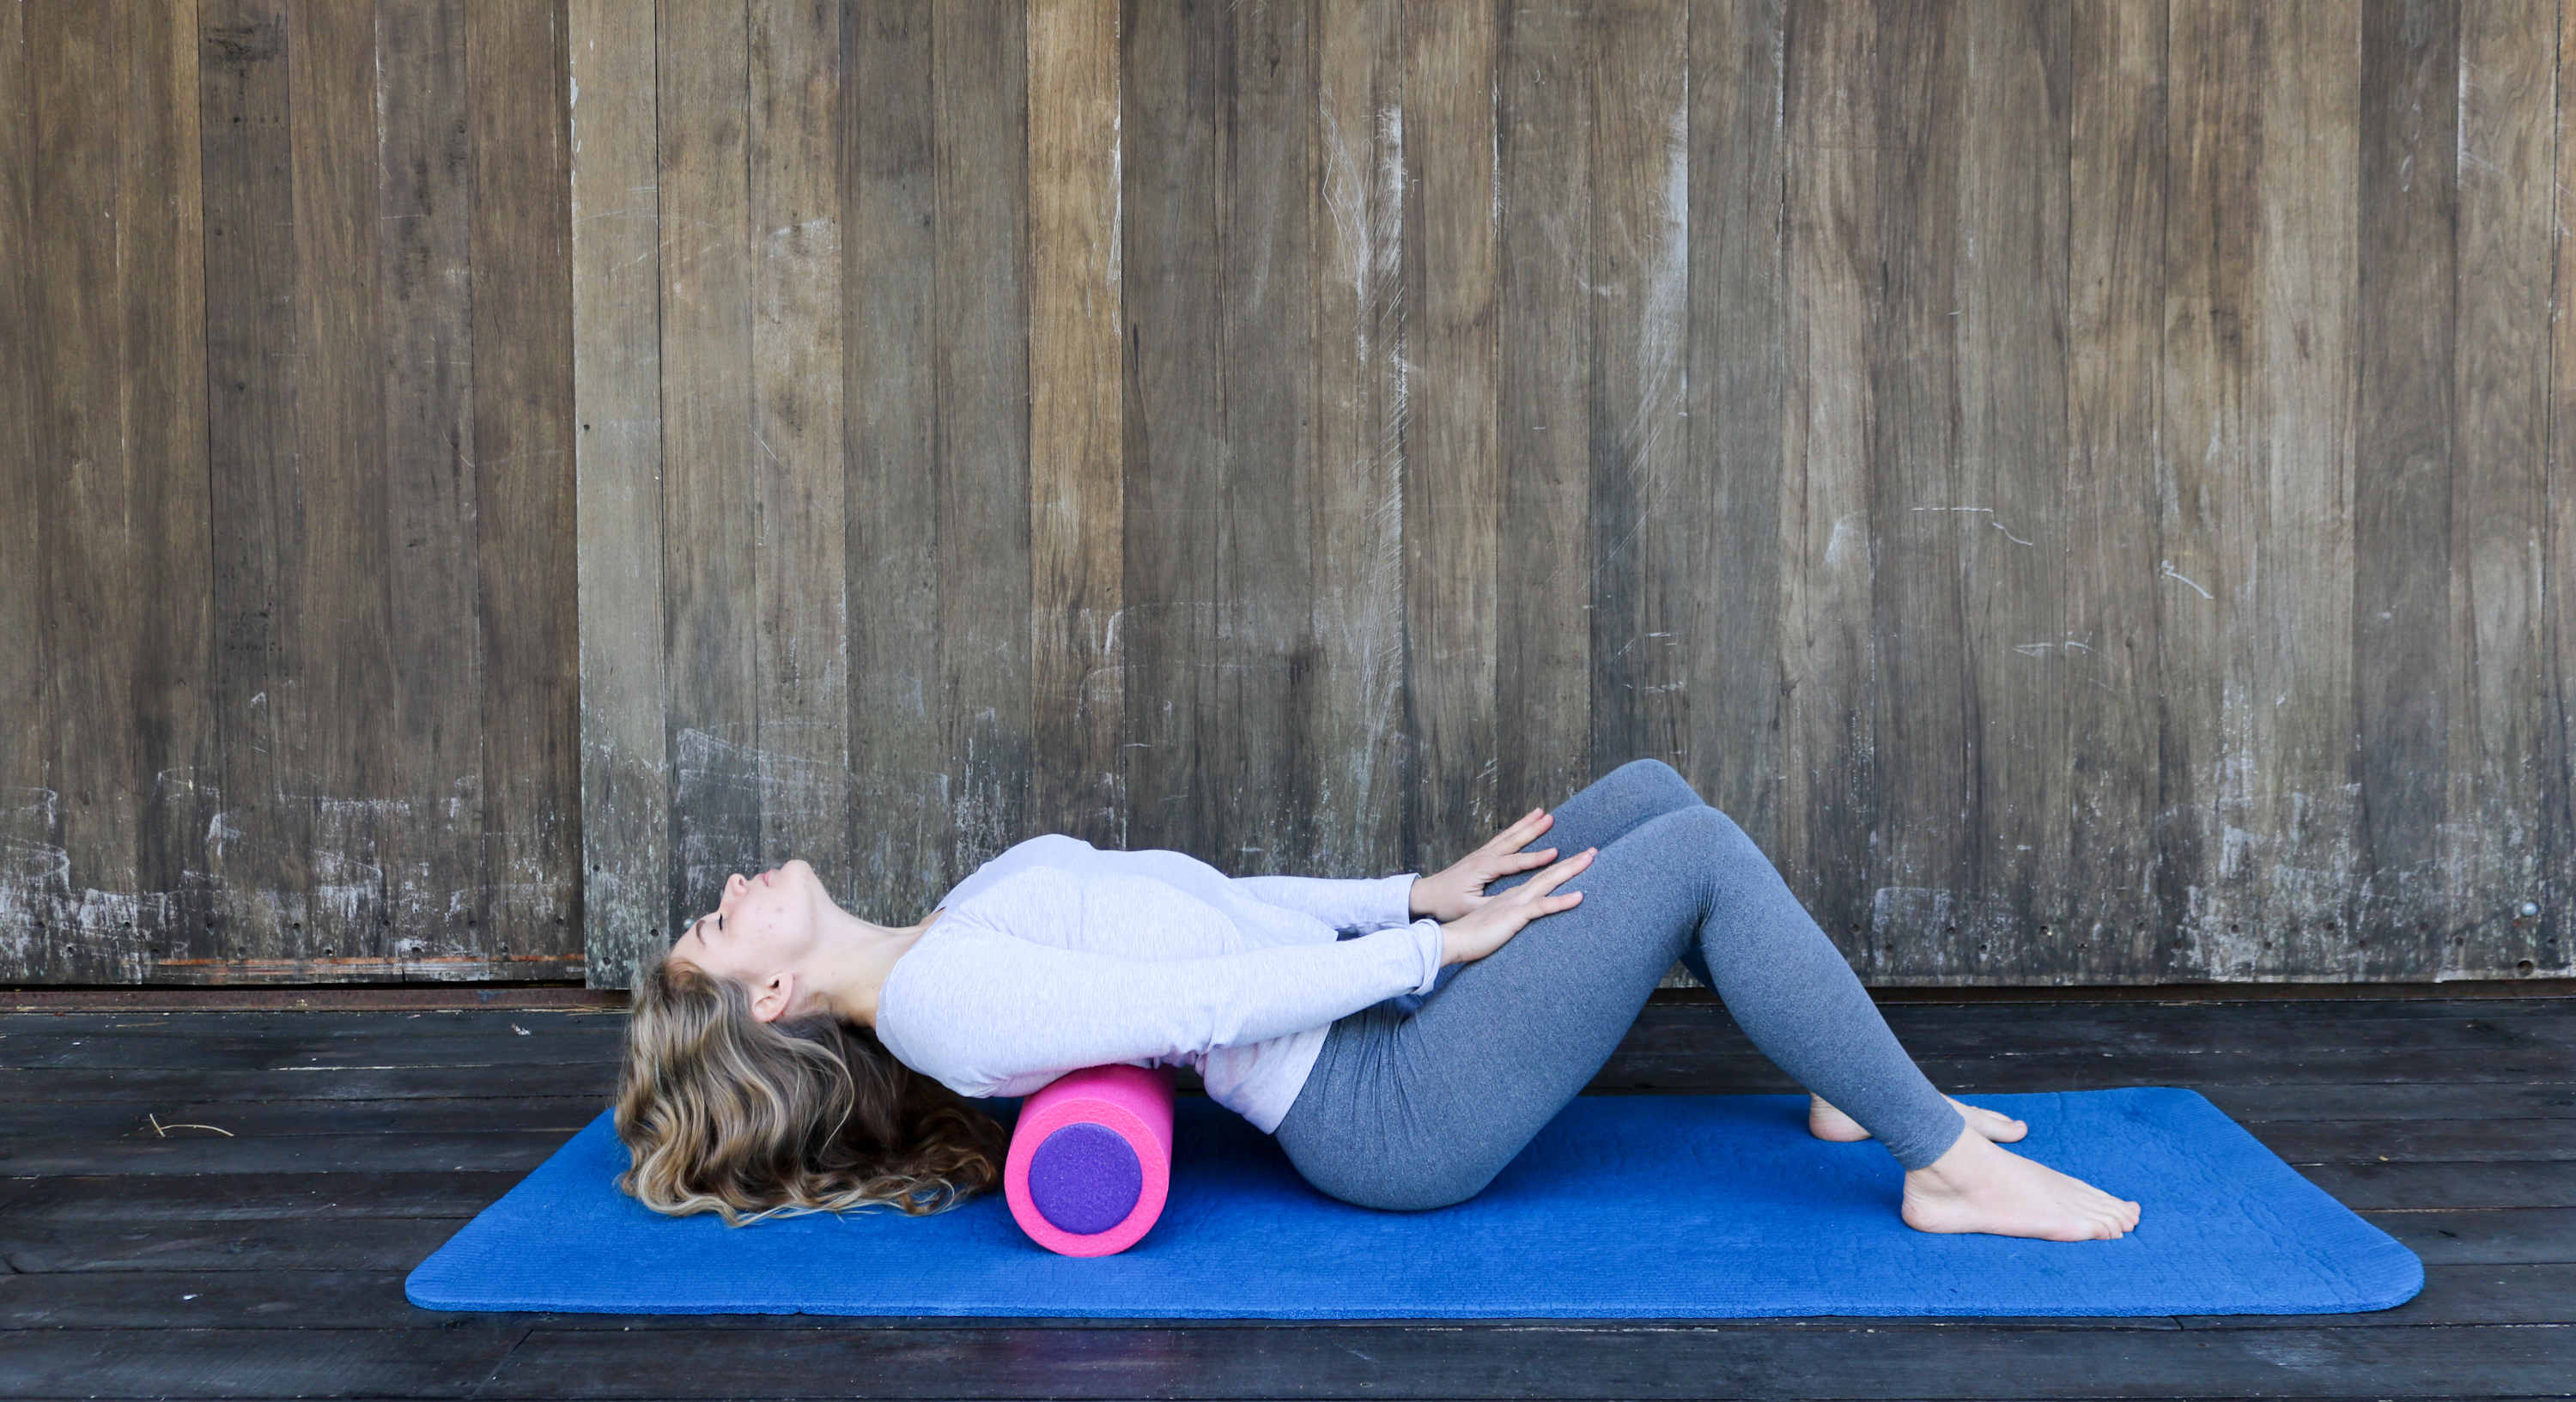 A young blond caucasian woman rolling her back on a foam roller on a blue yoga mat, wooden floor and wooden background.